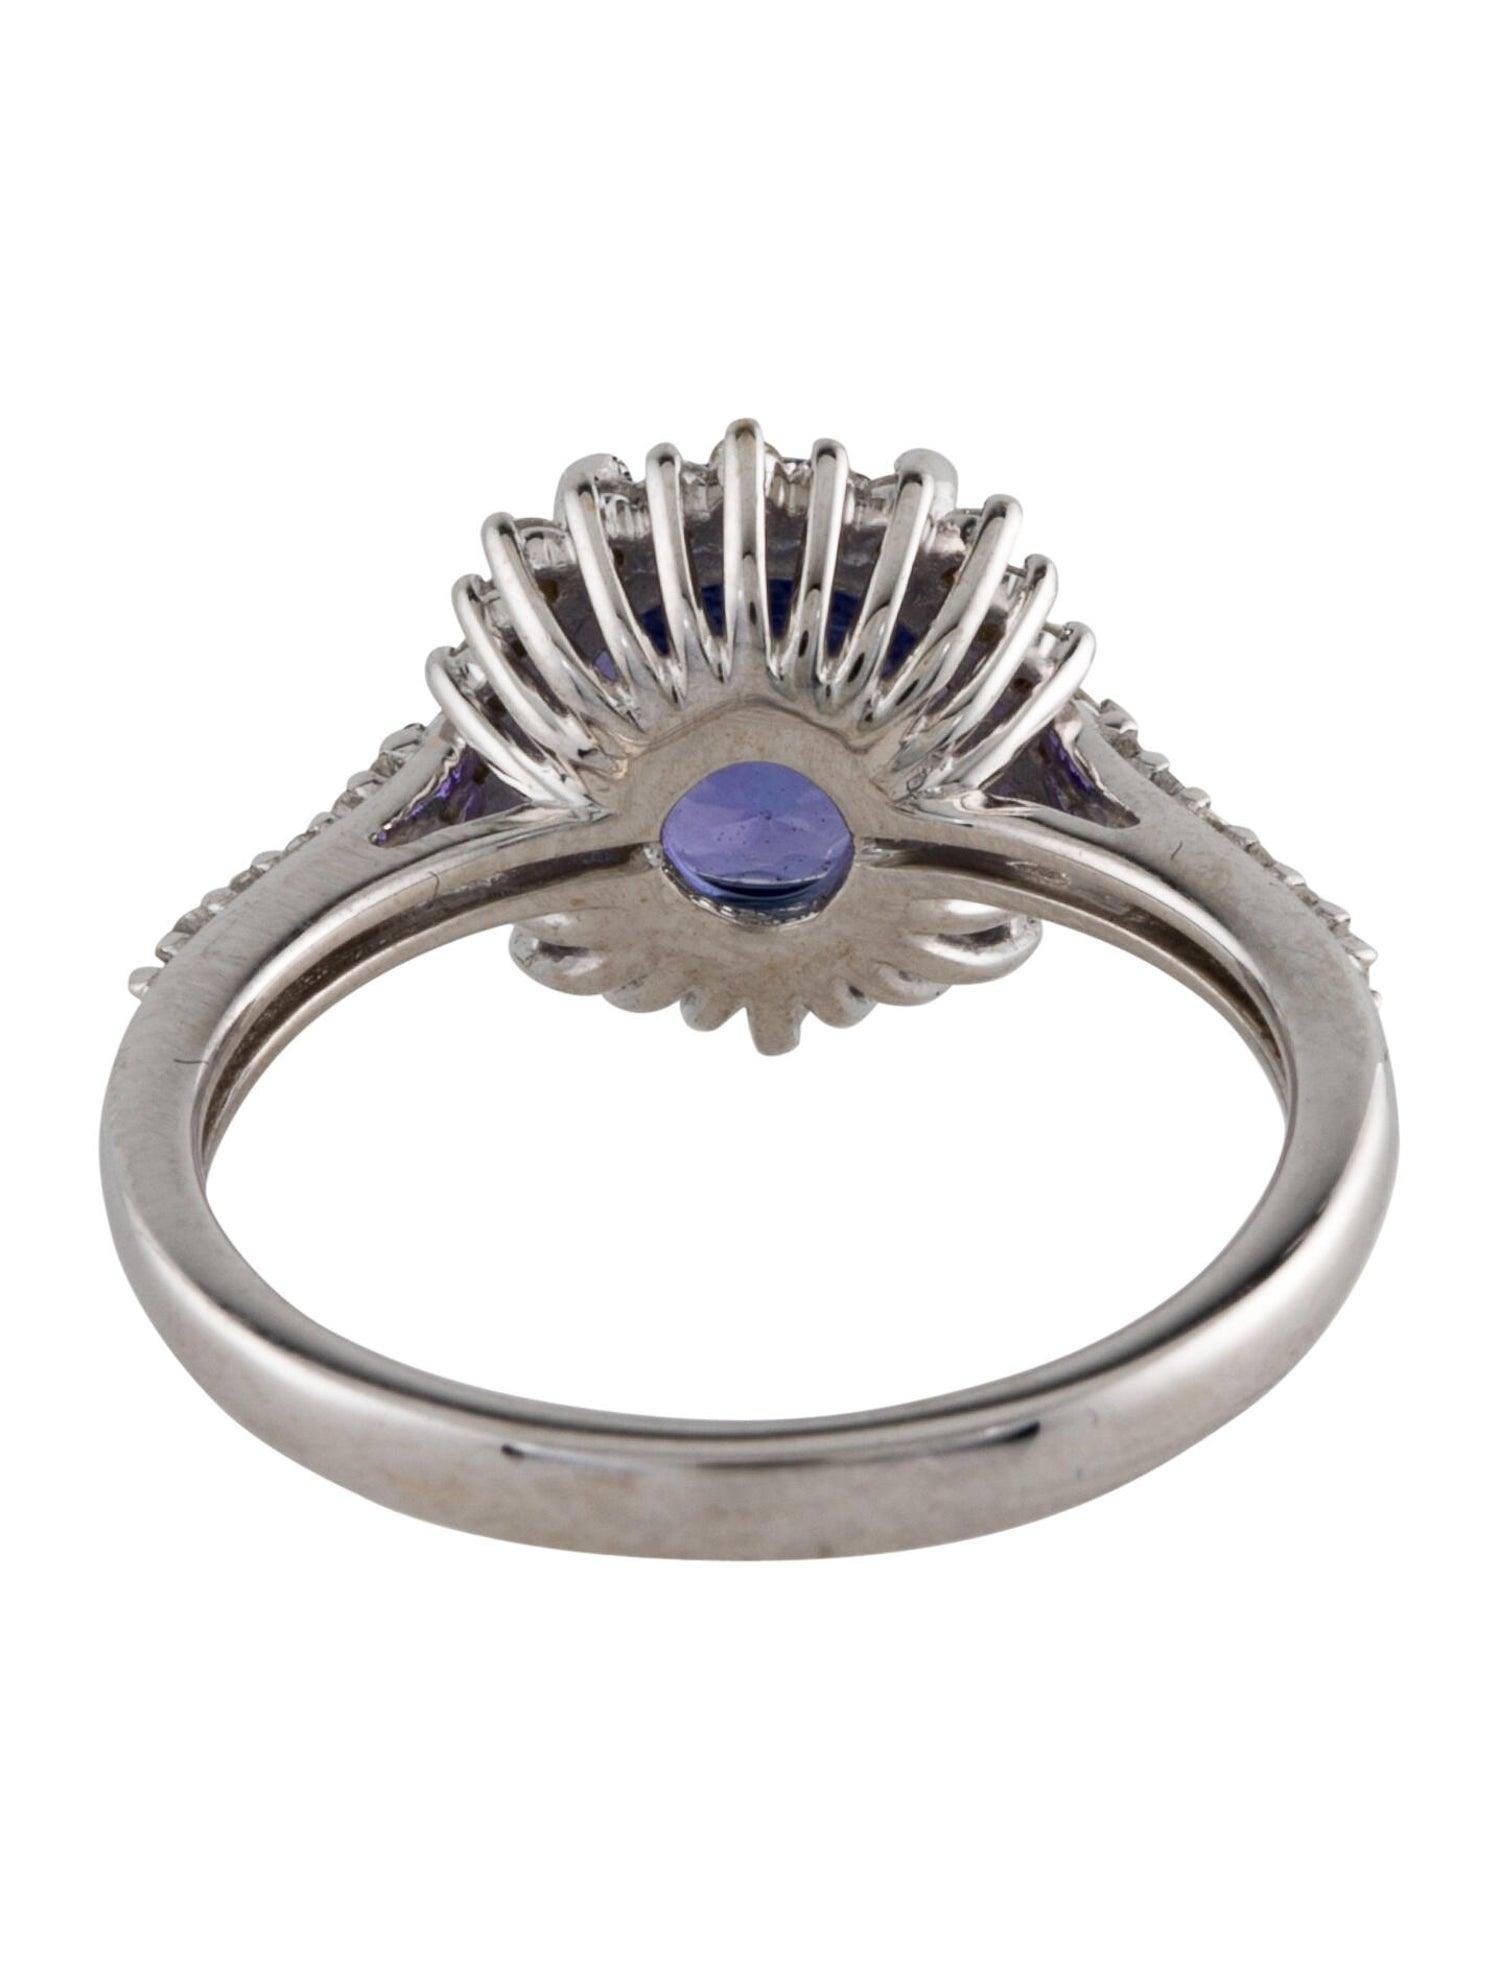 Luxurious 14K White Gold Tanzanite & Diamond Cocktail Ring, 2.25ct Round Faceted In New Condition For Sale In Holtsville, NY